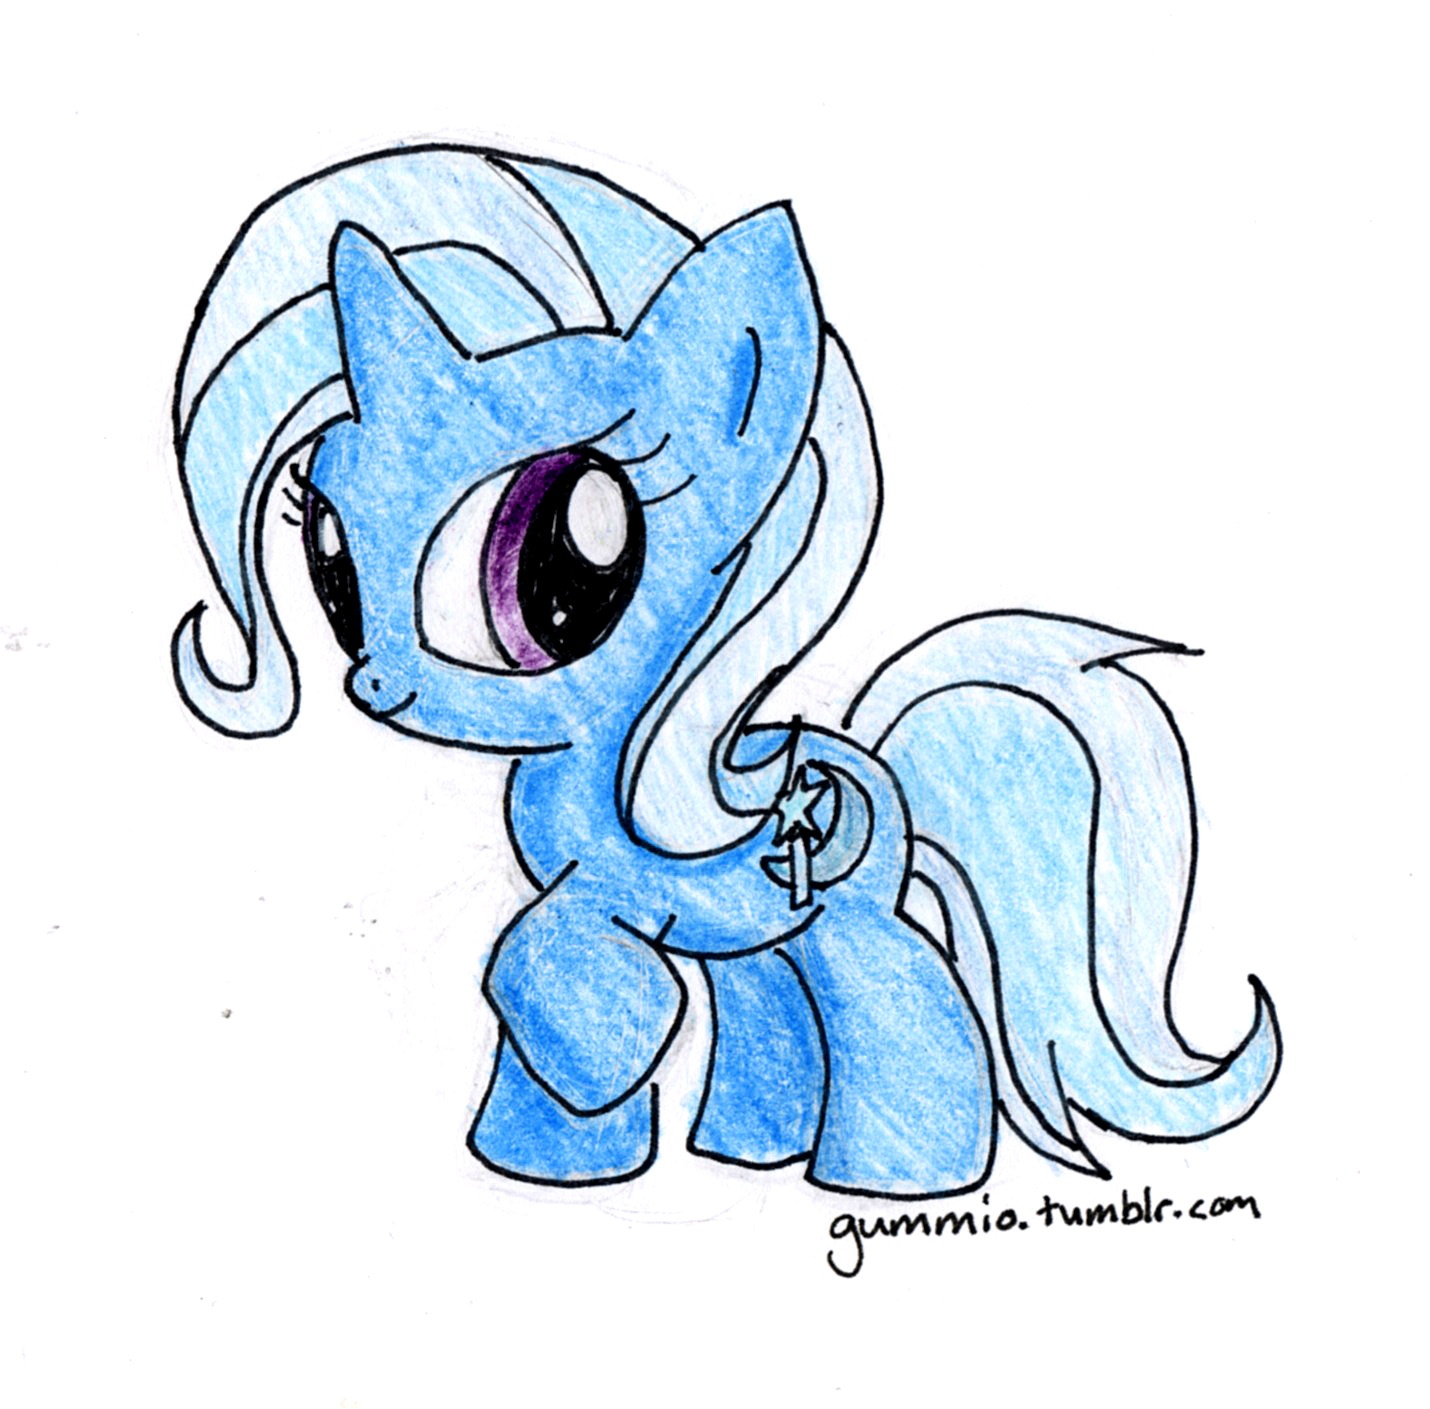 465987__safe_solo_trixie_traditional+art